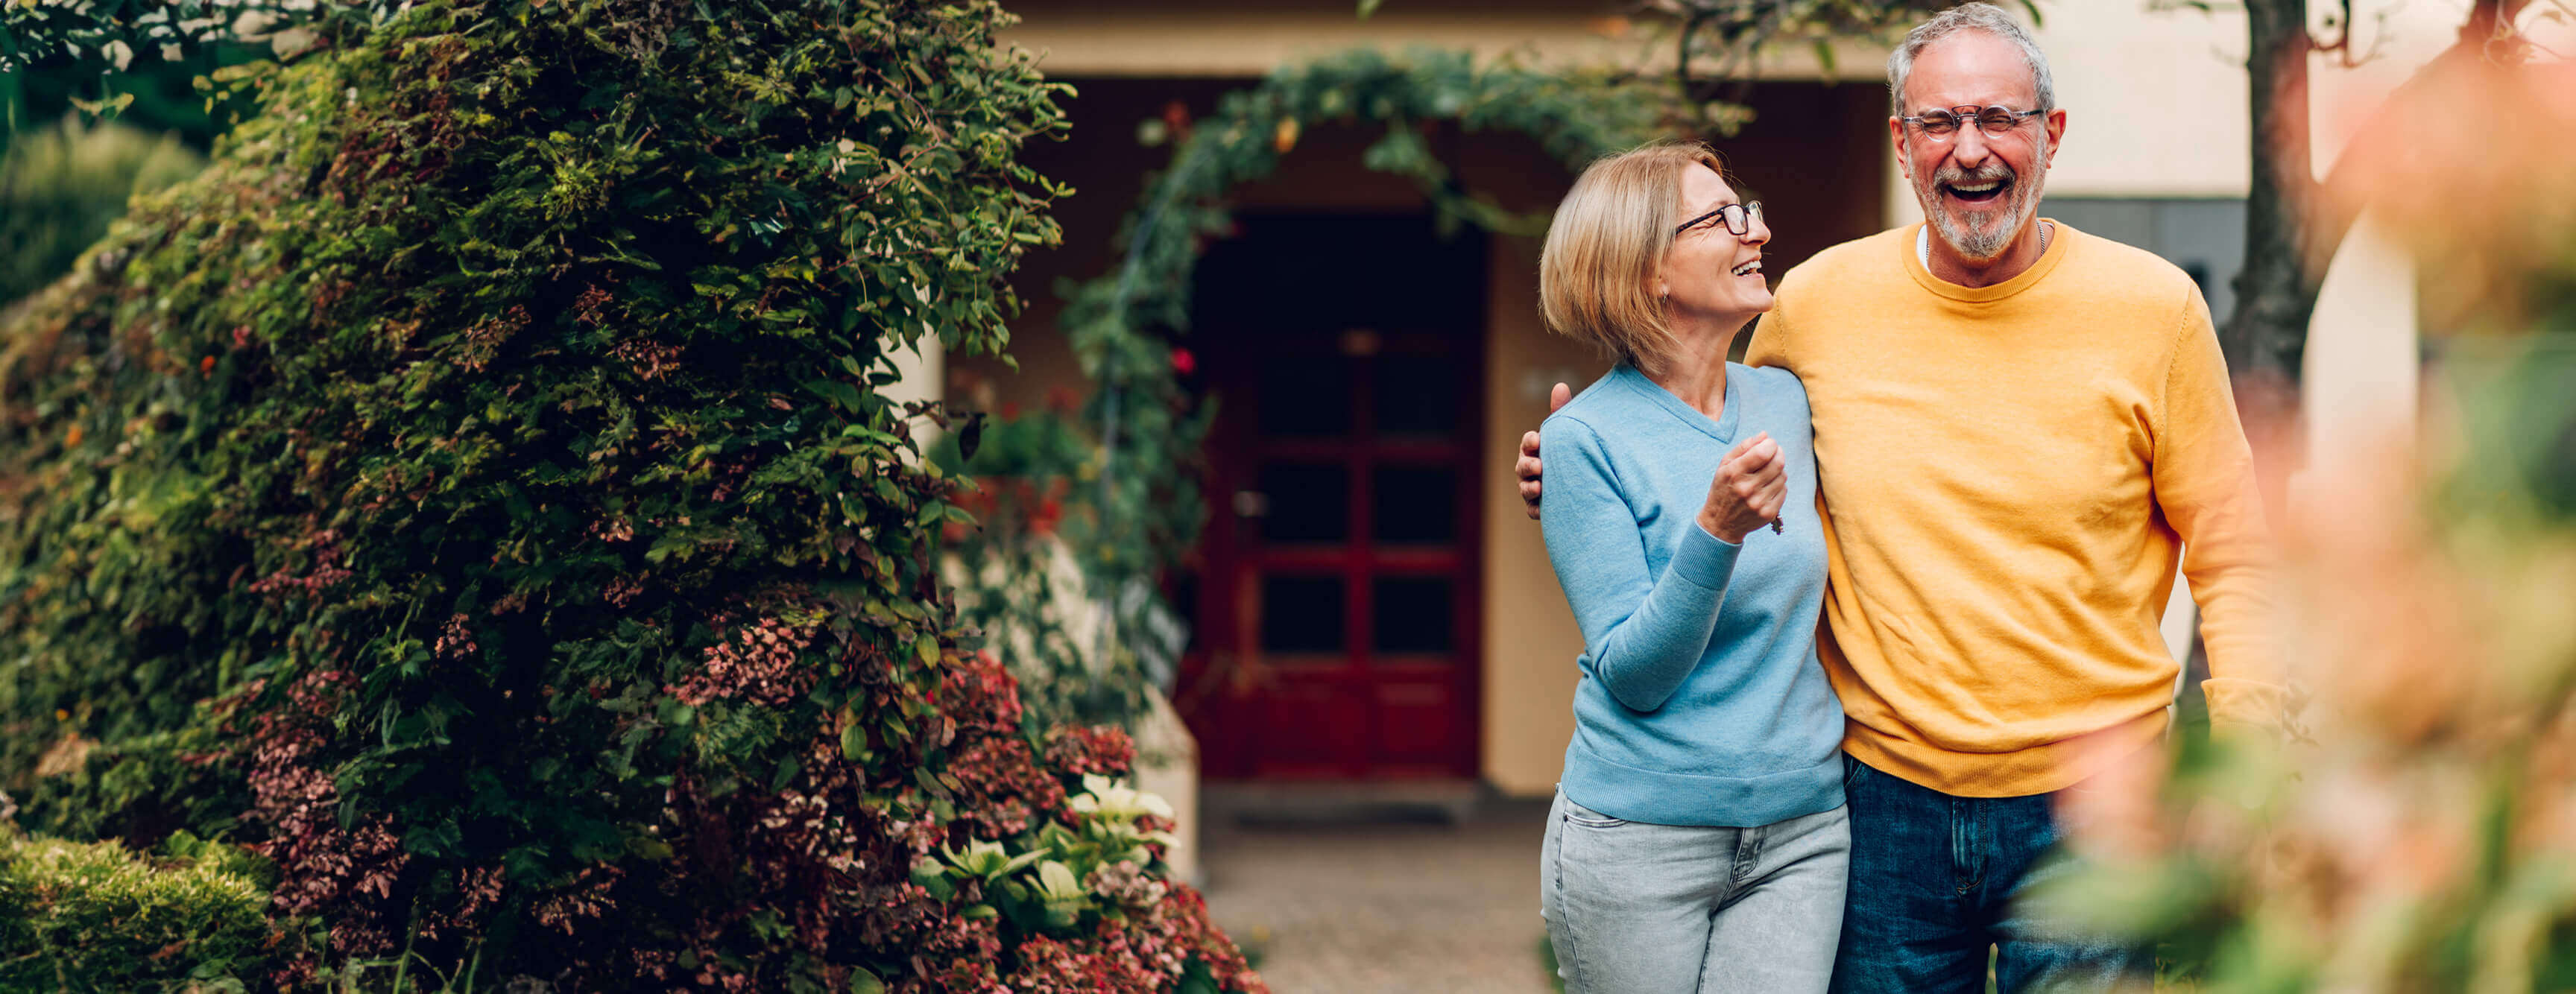 Explore KelseyCare Advantage: tailored Medicare plans for seniors with top-rated doctors, low costs, and extra benefits. Find your ideal plan now! 